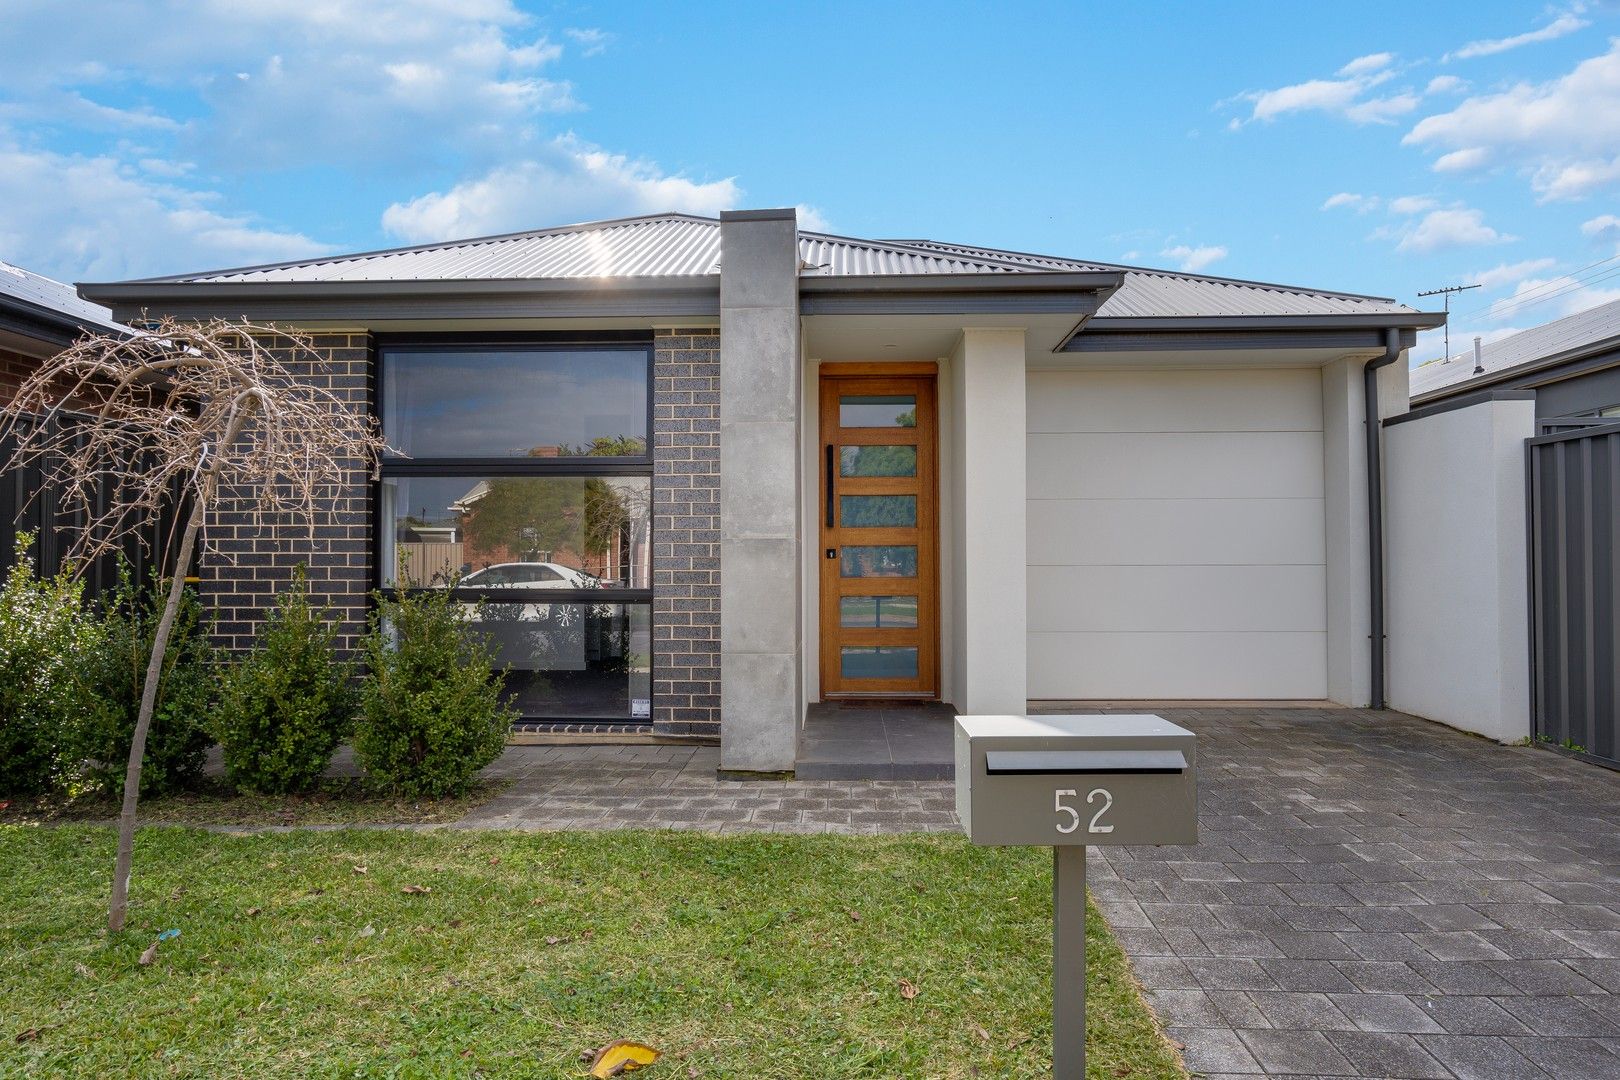 3 bedrooms House in 52 reserve parade FINDON SA, 5023